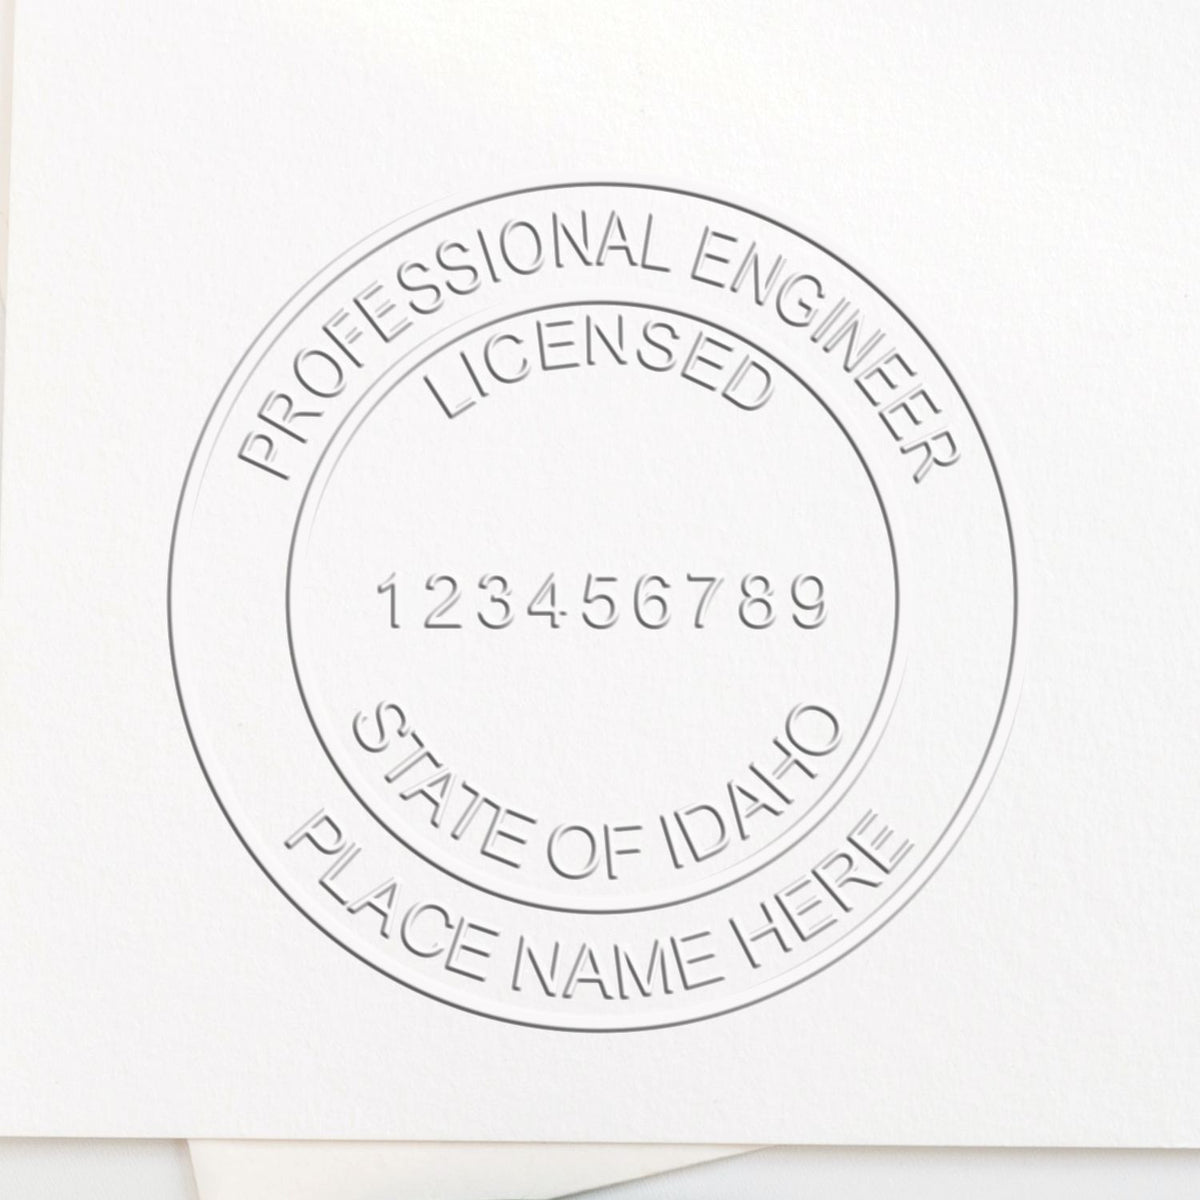 The State of Idaho Extended Long Reach Engineer Seal stamp impression comes to life with a crisp, detailed photo on paper - showcasing true professional quality.